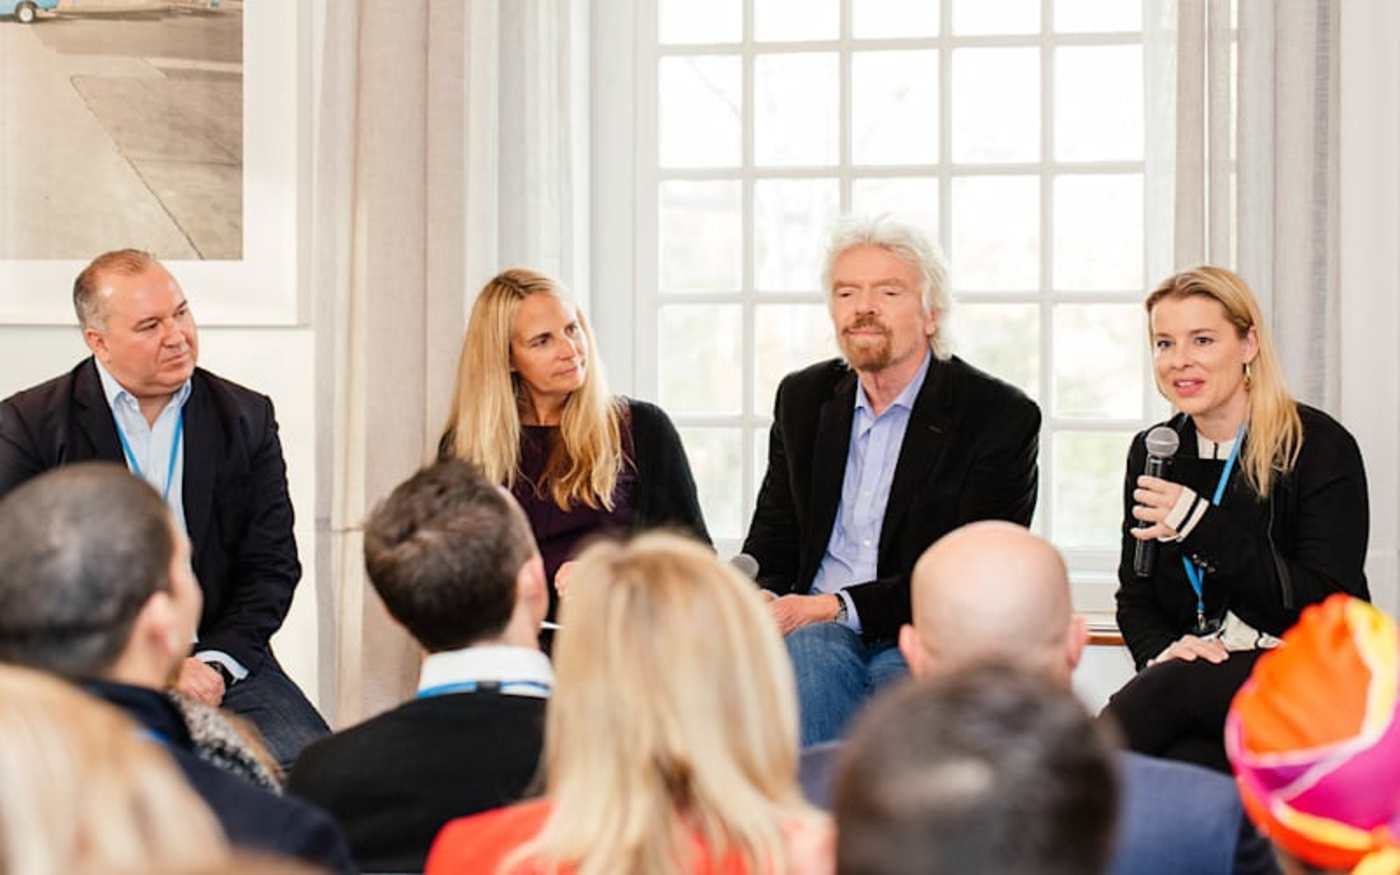 Jean Oelwang and Richard Branson speak on a panel discussion